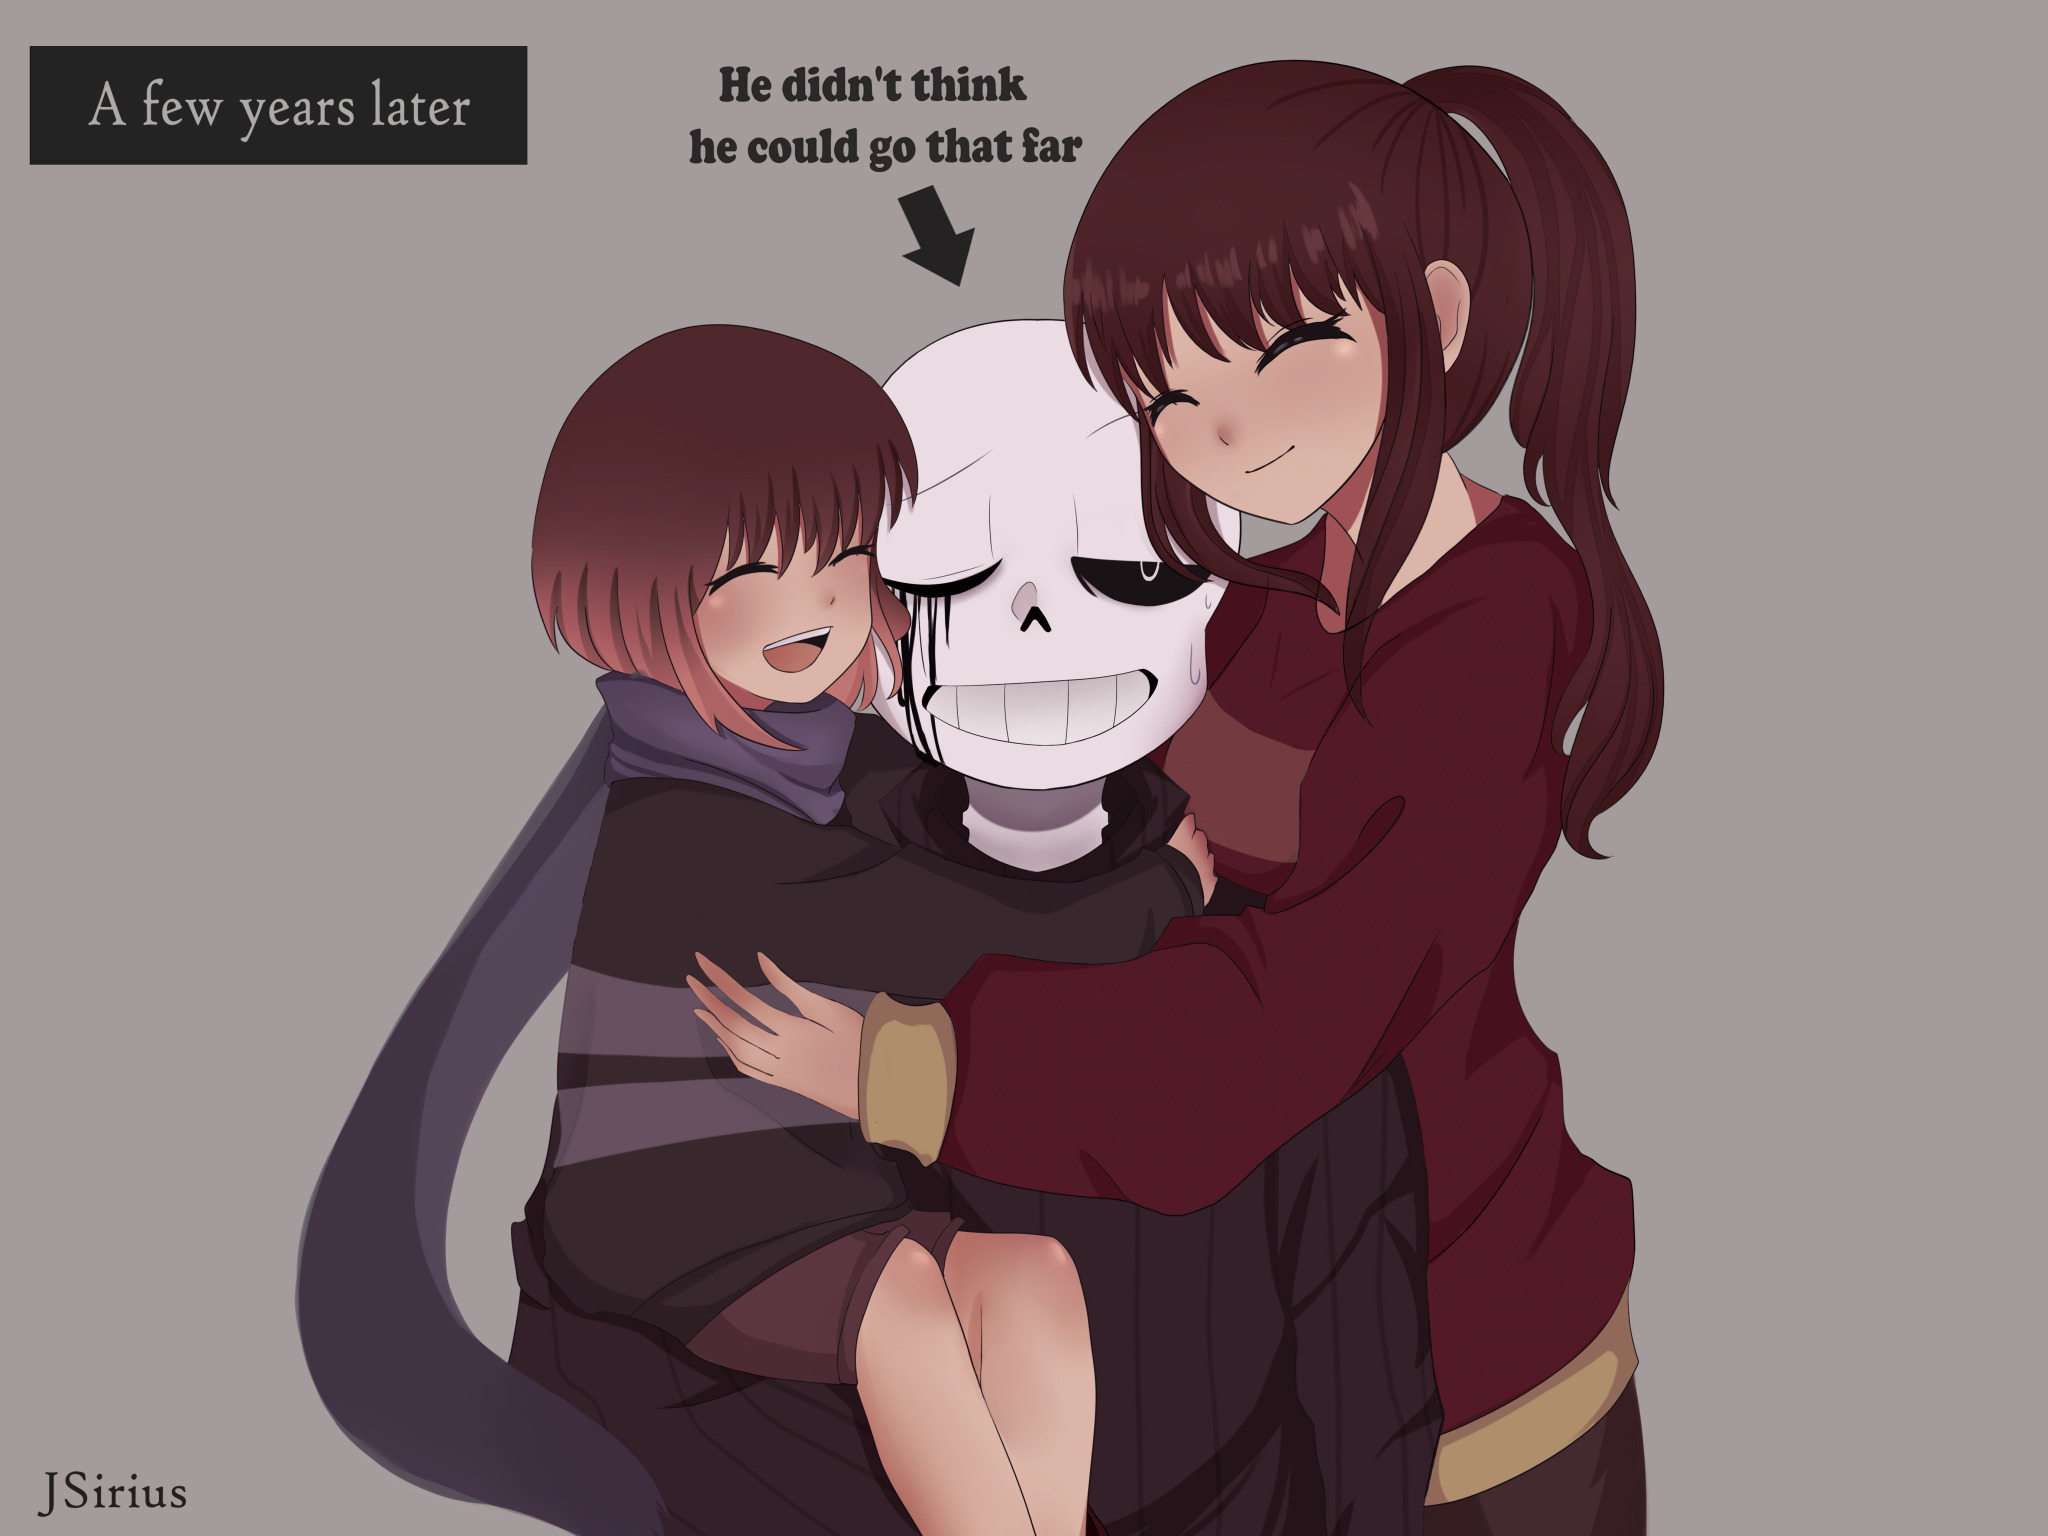 ☆ Sweetness × on X: ☆ Daughter of Killer!Sans and Fp! Frisk I did this  based on a question on tumblr ❤️ #Undertale好きさんと繋がりたい #undertaleAU # killersans #daughter  / X